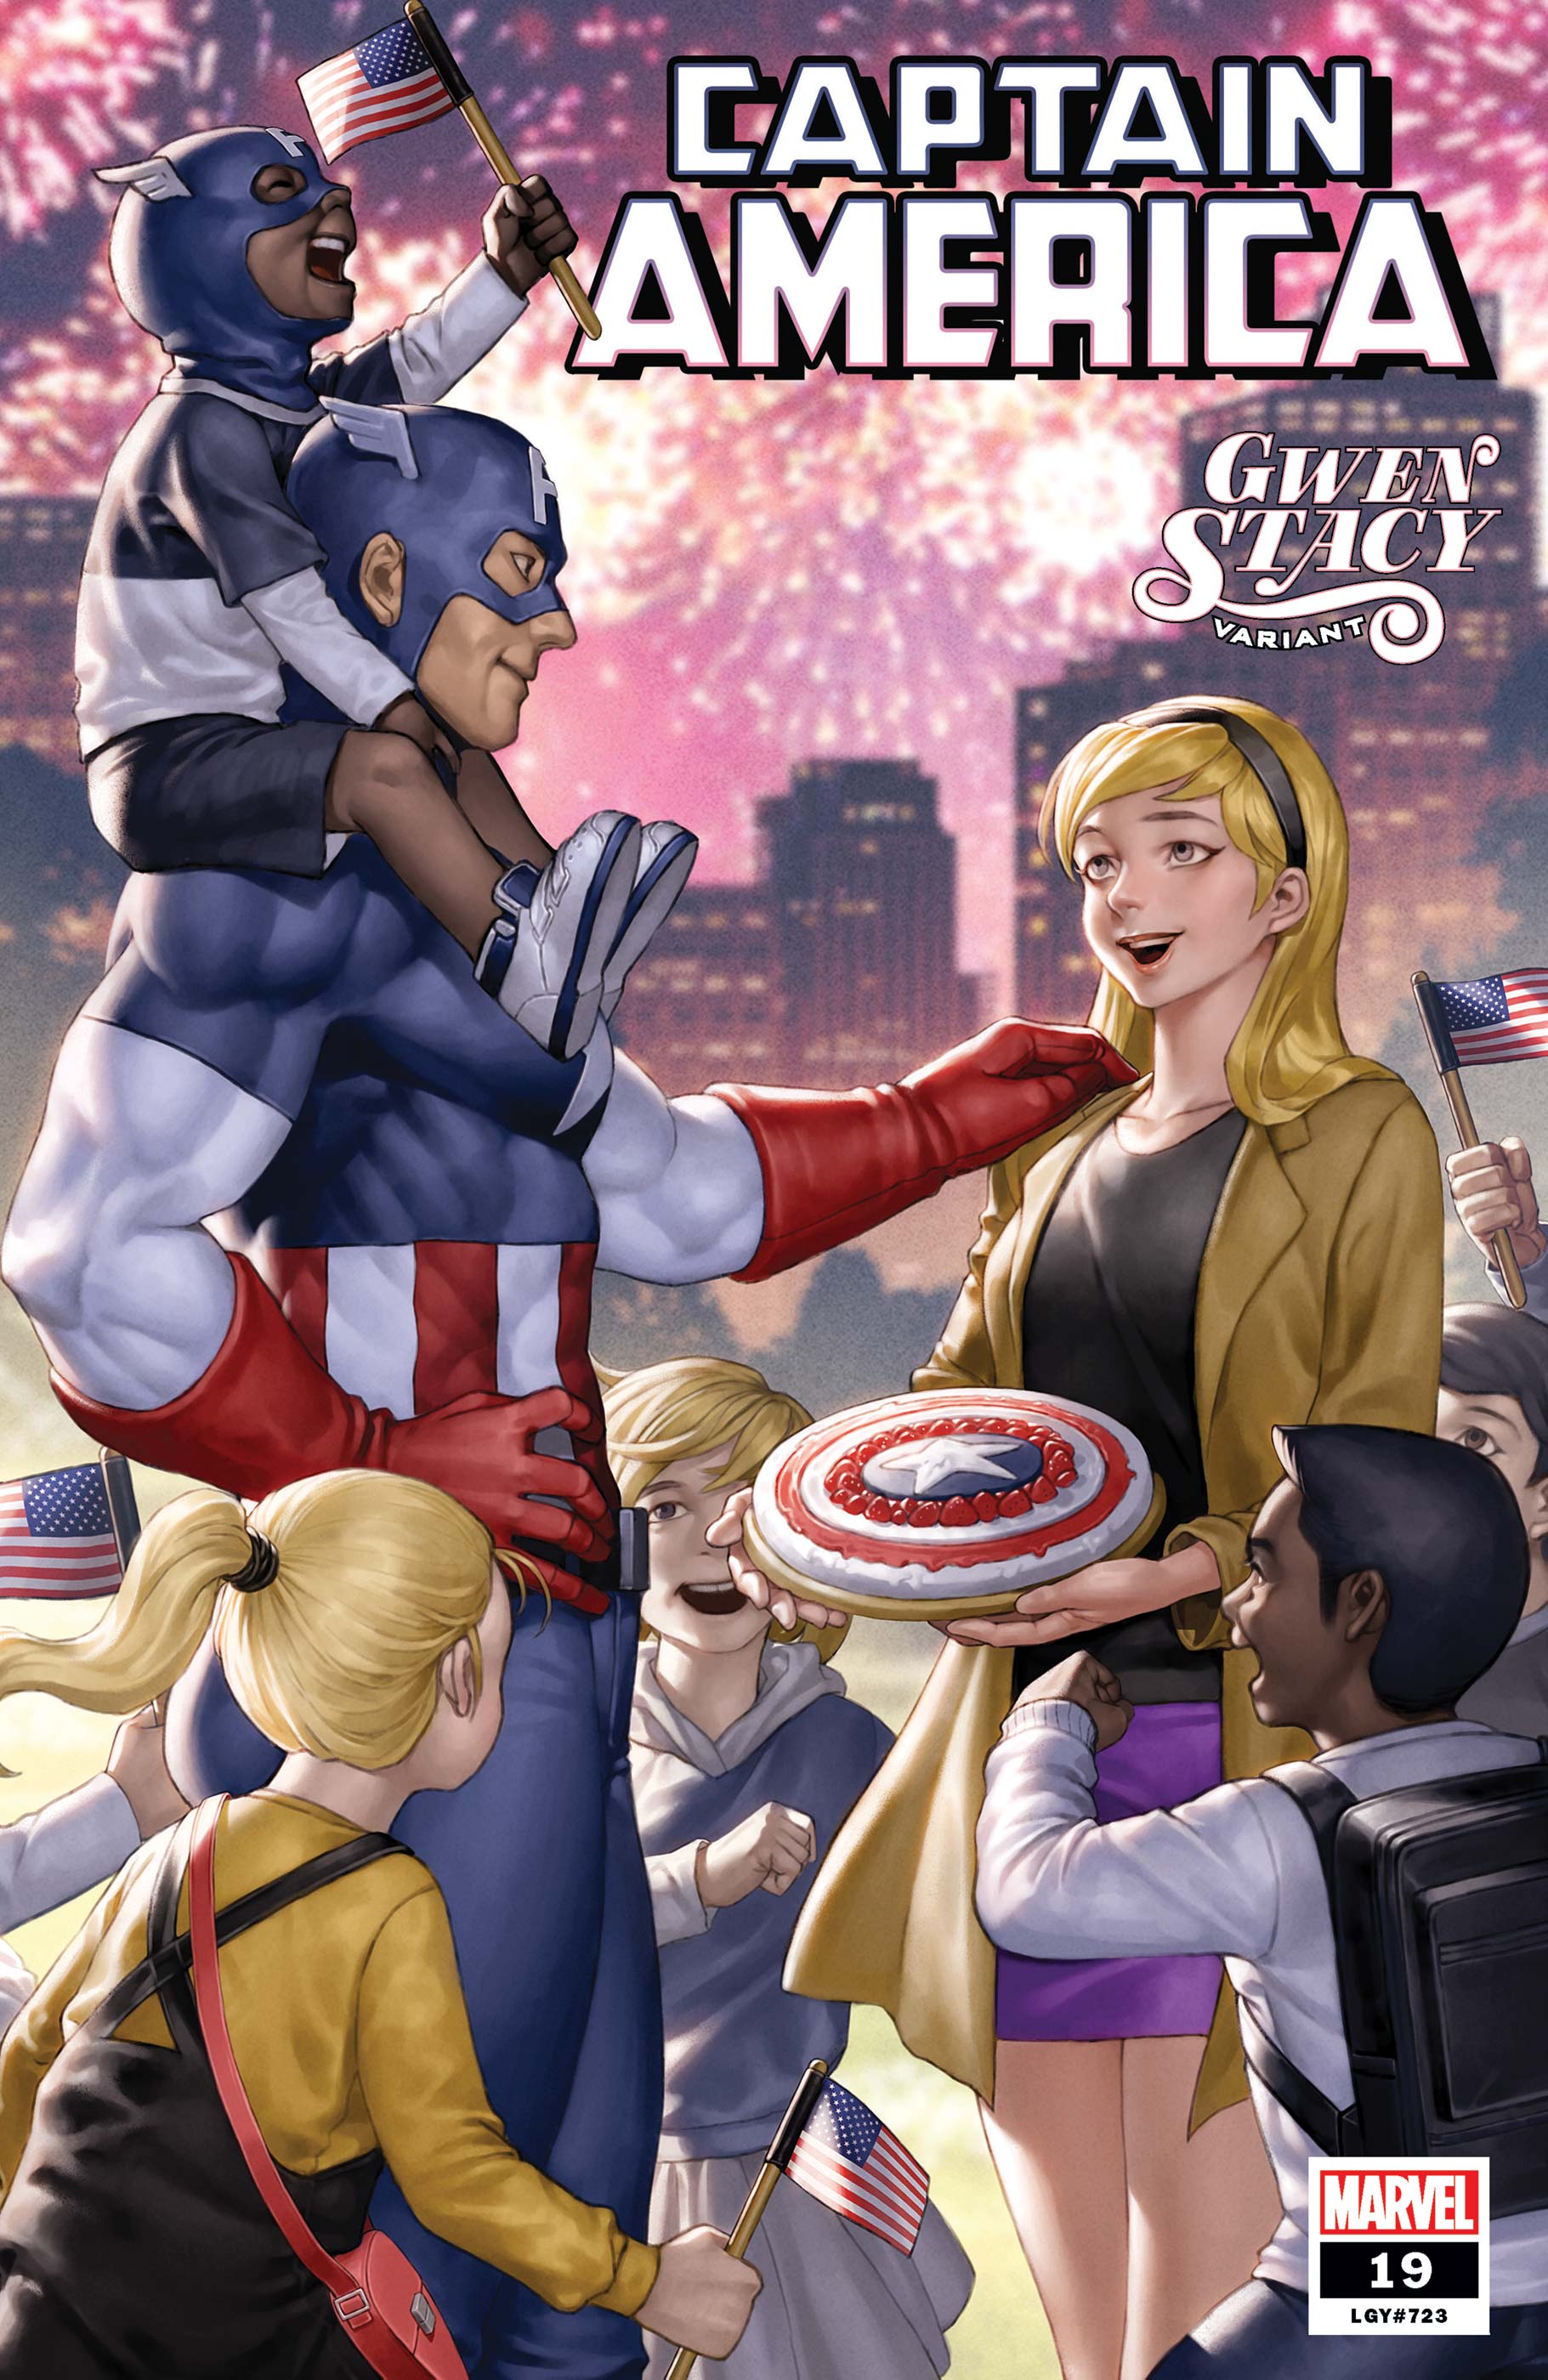 Captain America #19 Yoon Gwen Stacy Variant (2018)